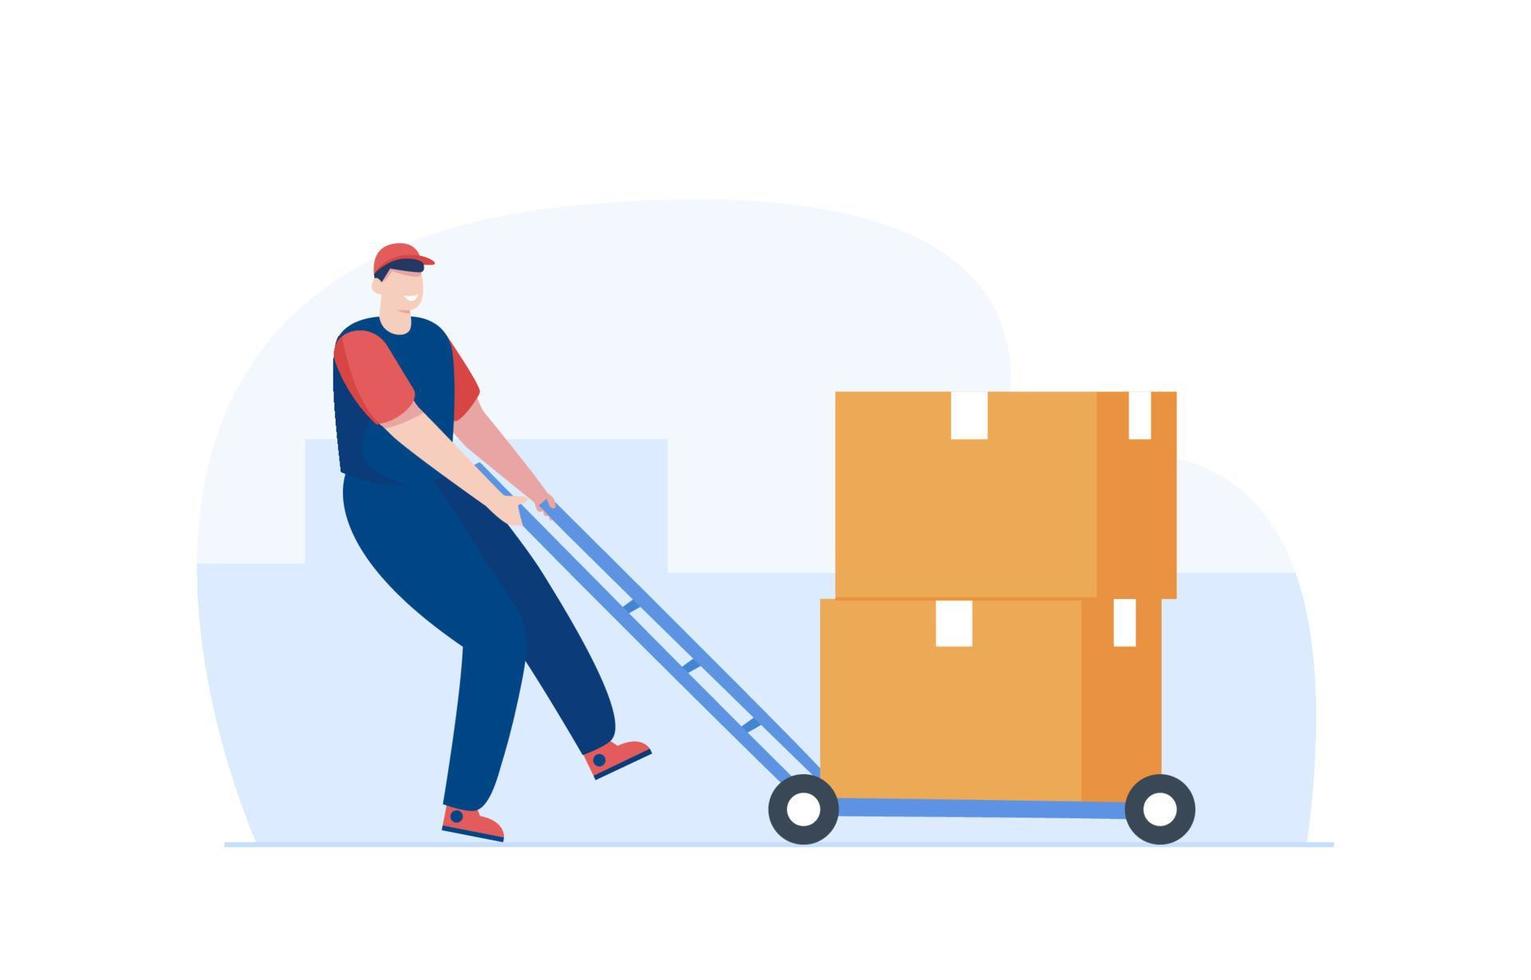 Warehouse worker. Man pushing parcel trolley. Illustration vector